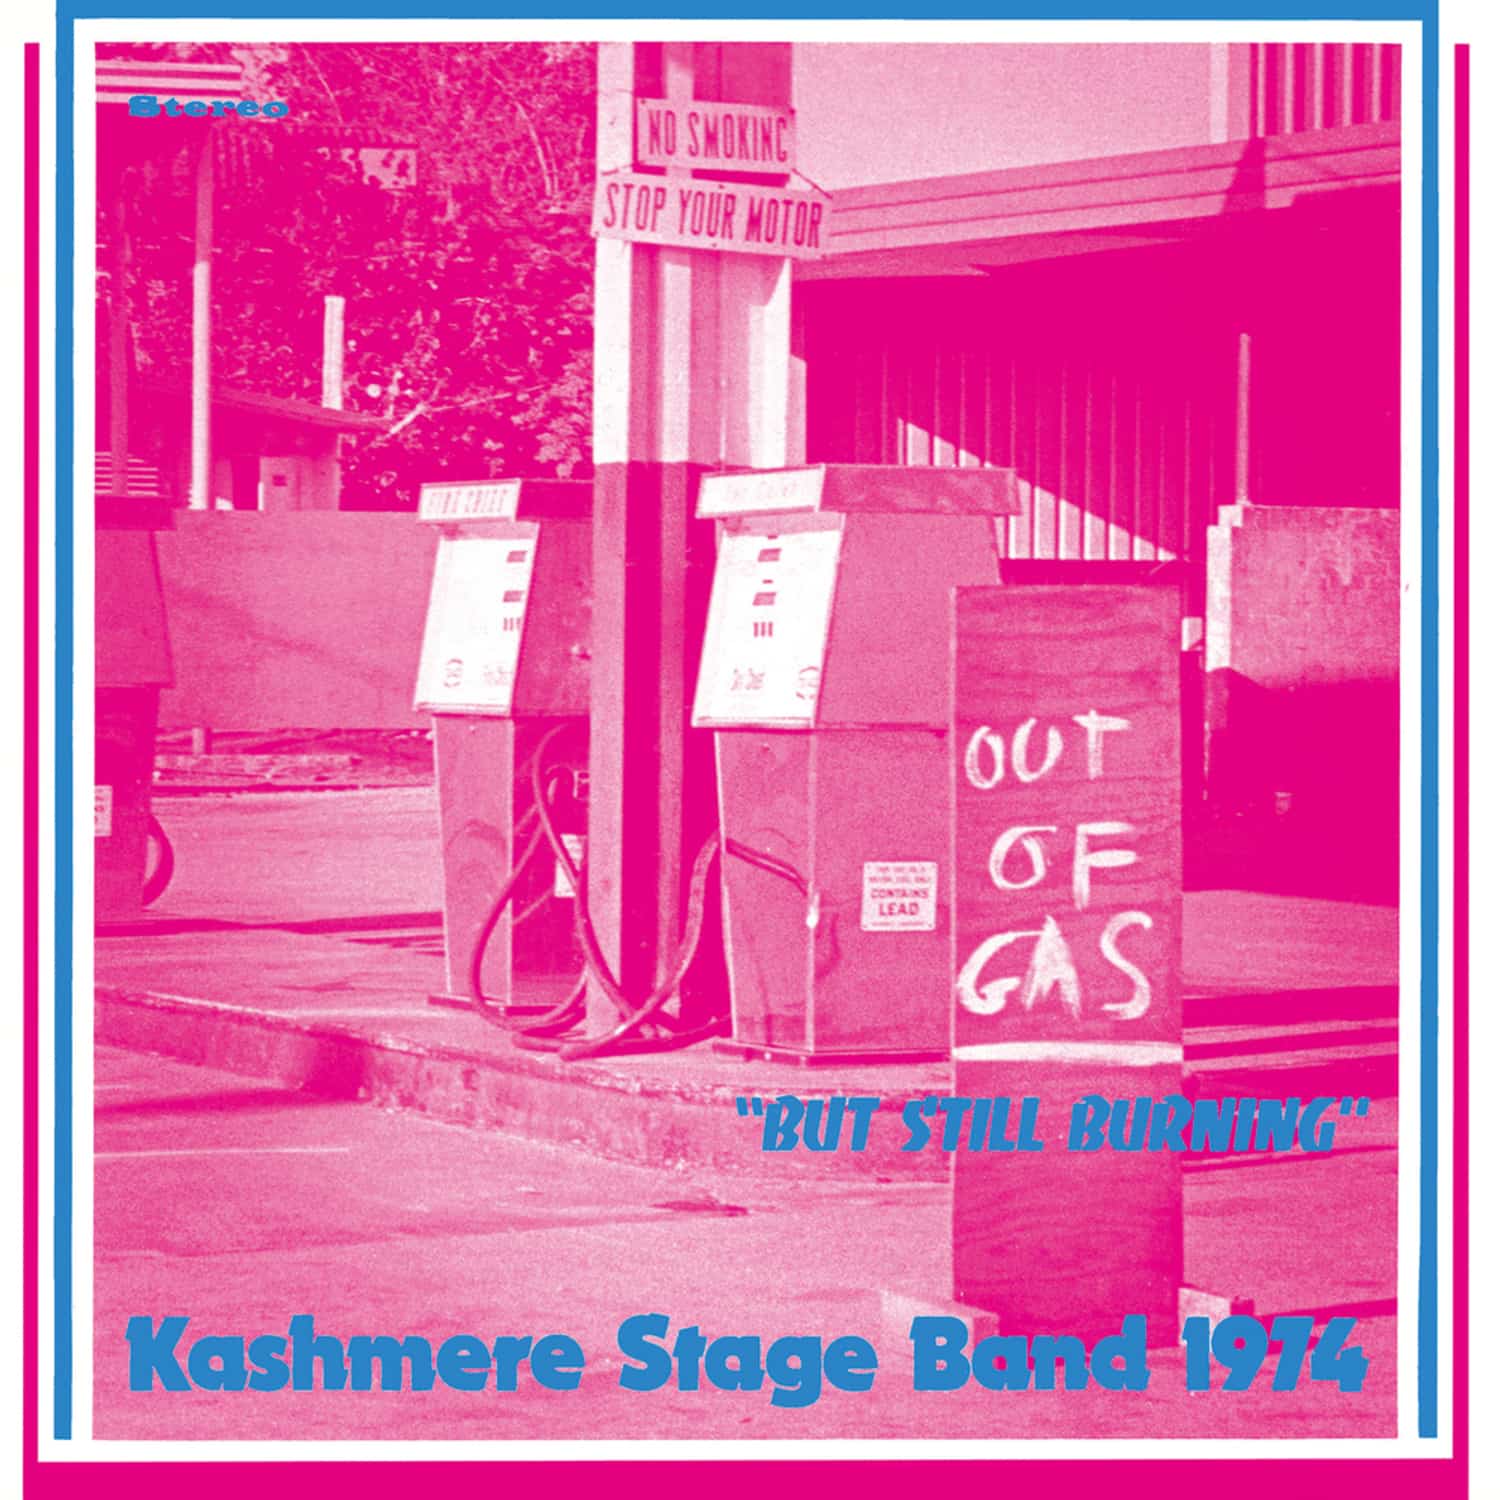 Kashmere Stage Band - OUT OF GAS BUT STILL BURNING 